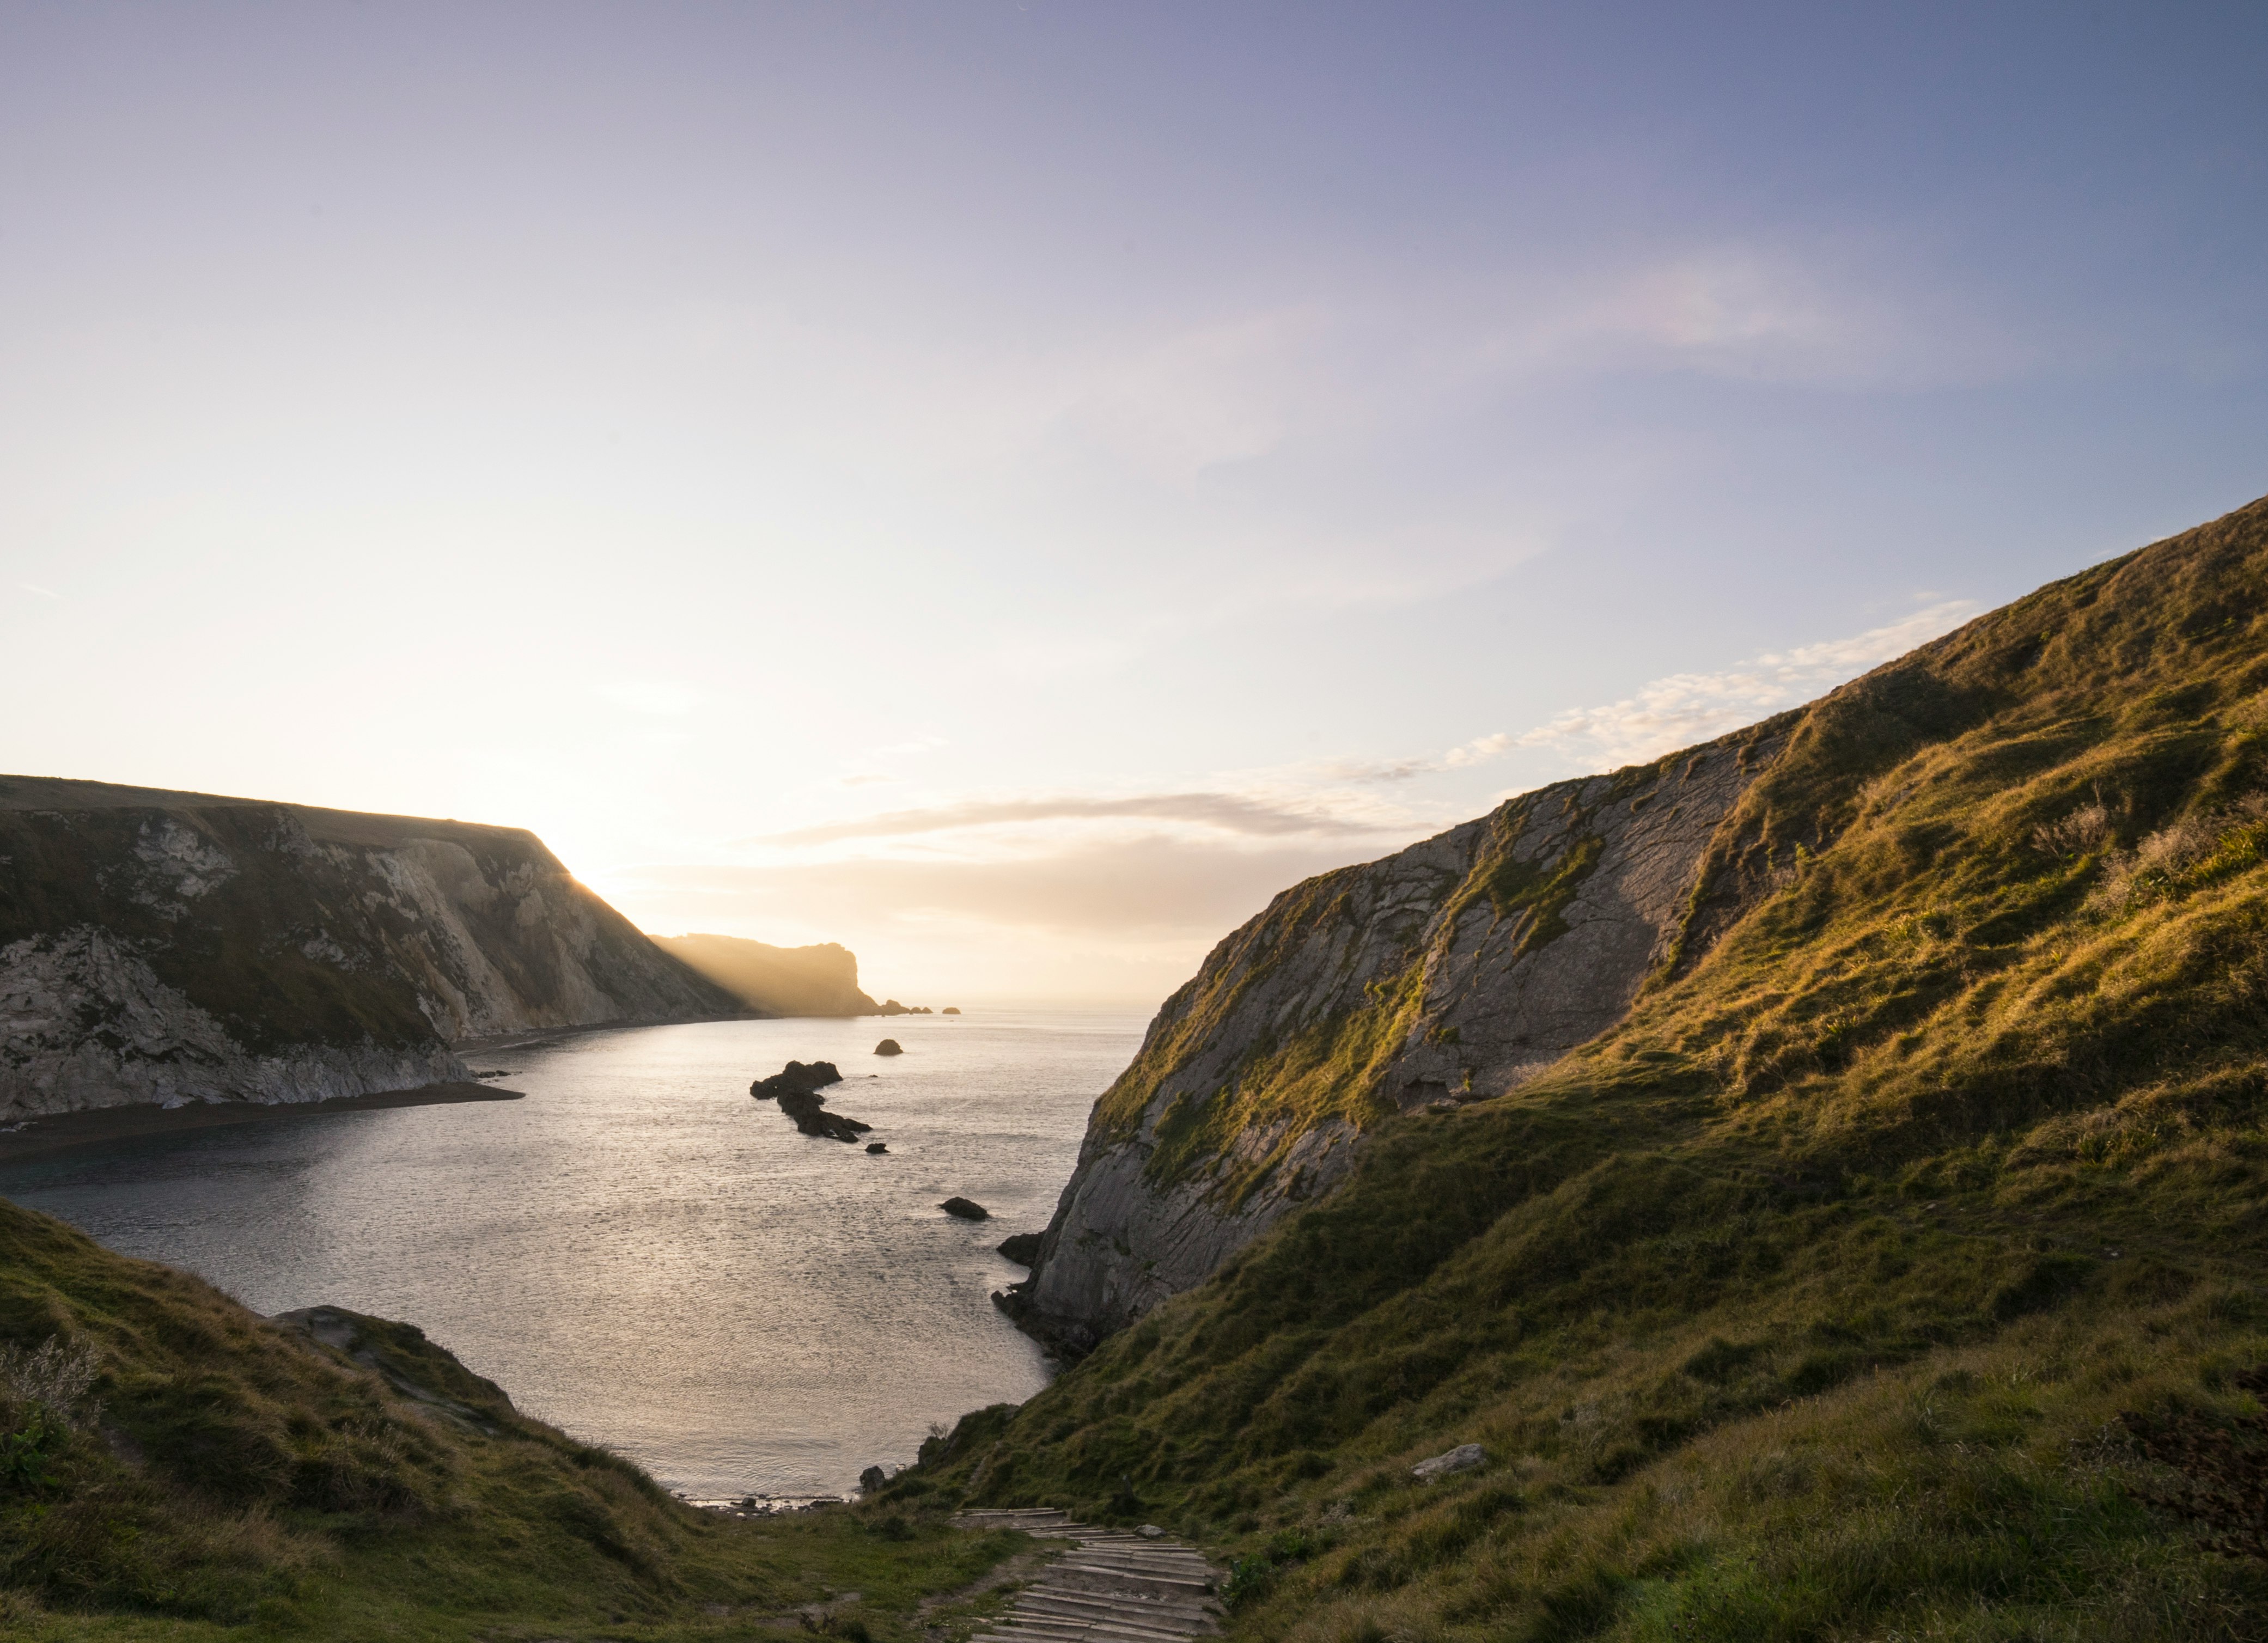 landscape photography of cliff near body of water